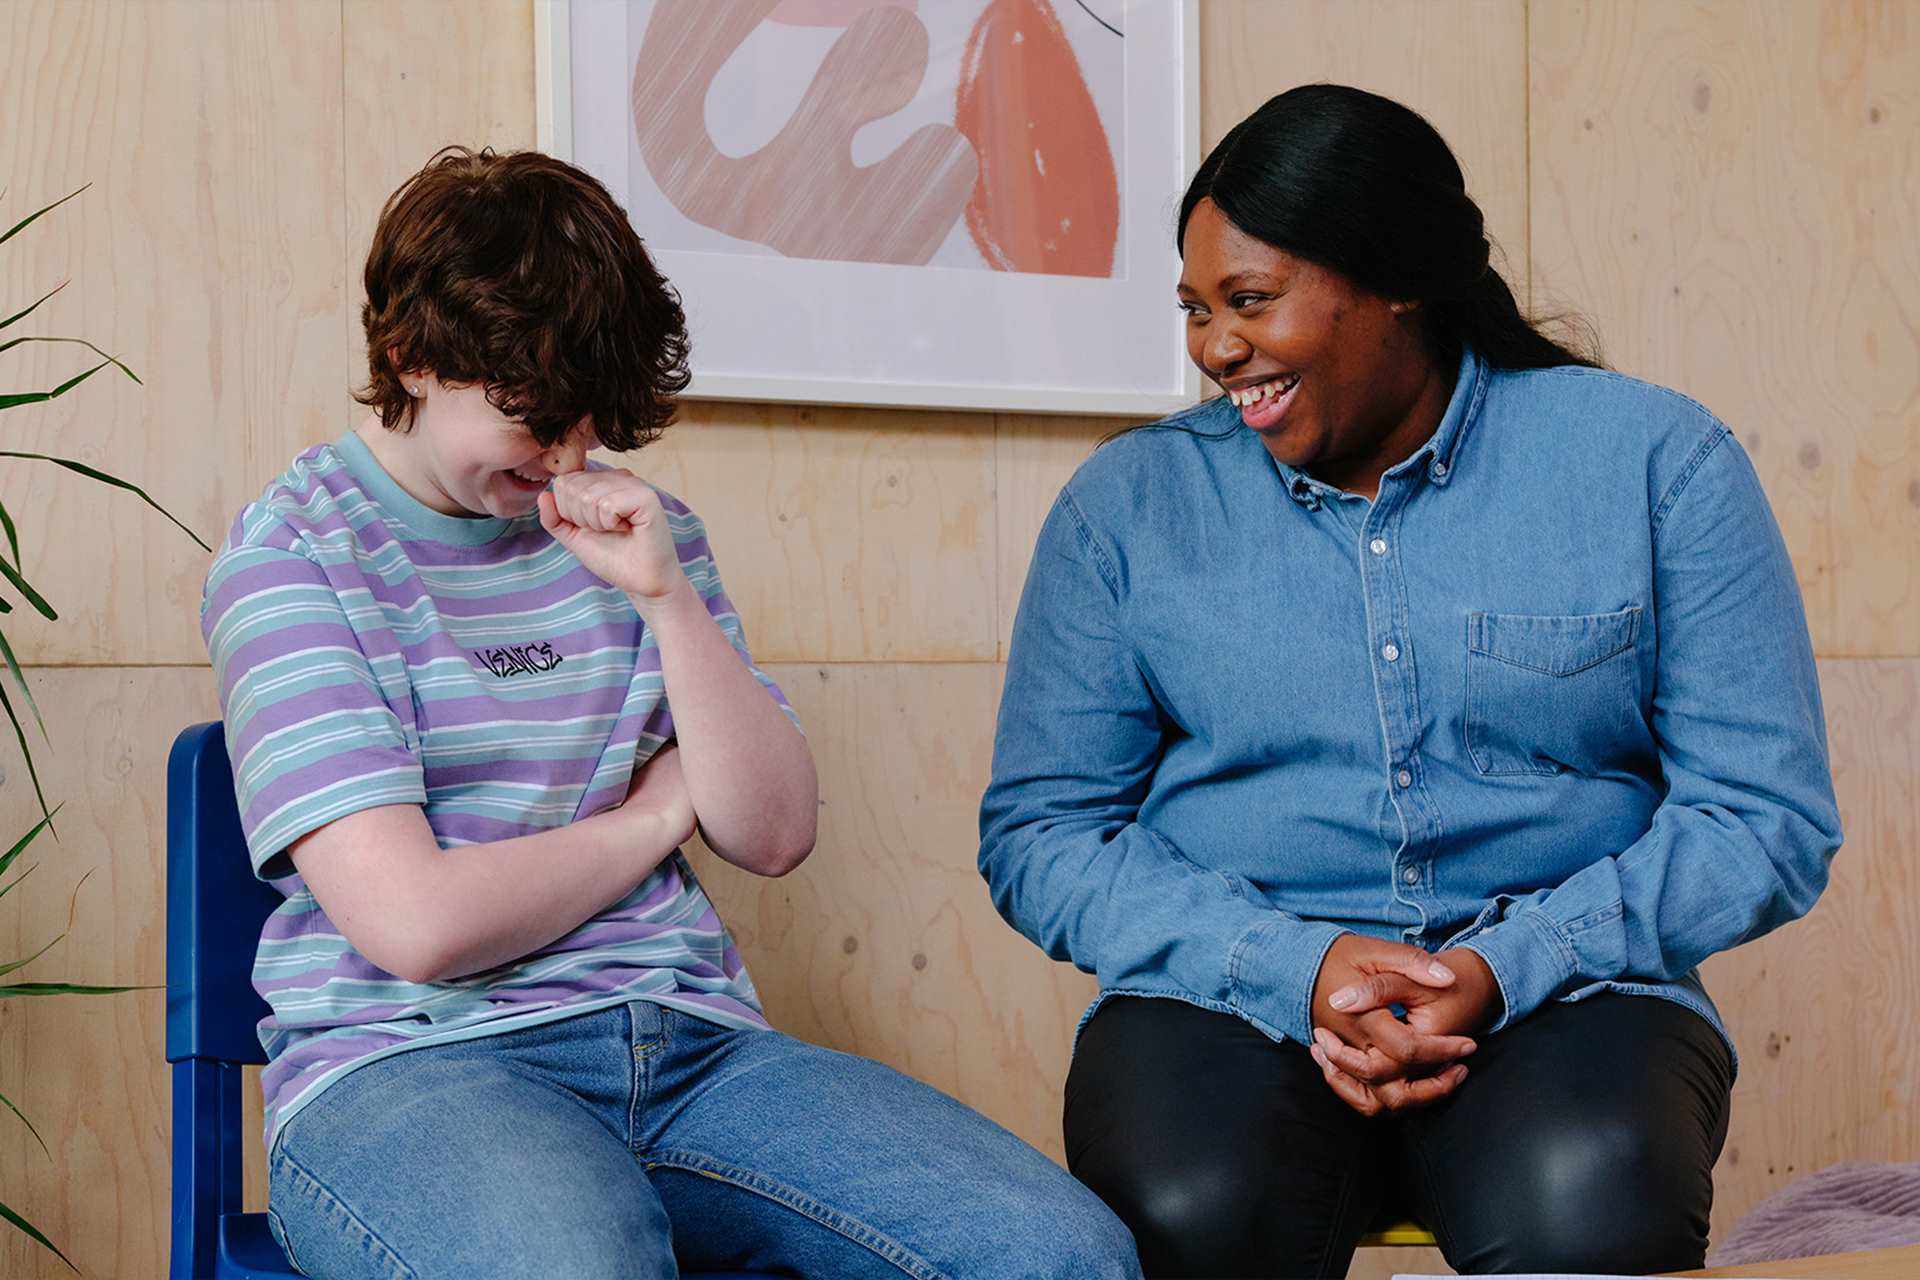 A white non-binary teenager laughing with an older Black woman in a professional setting.